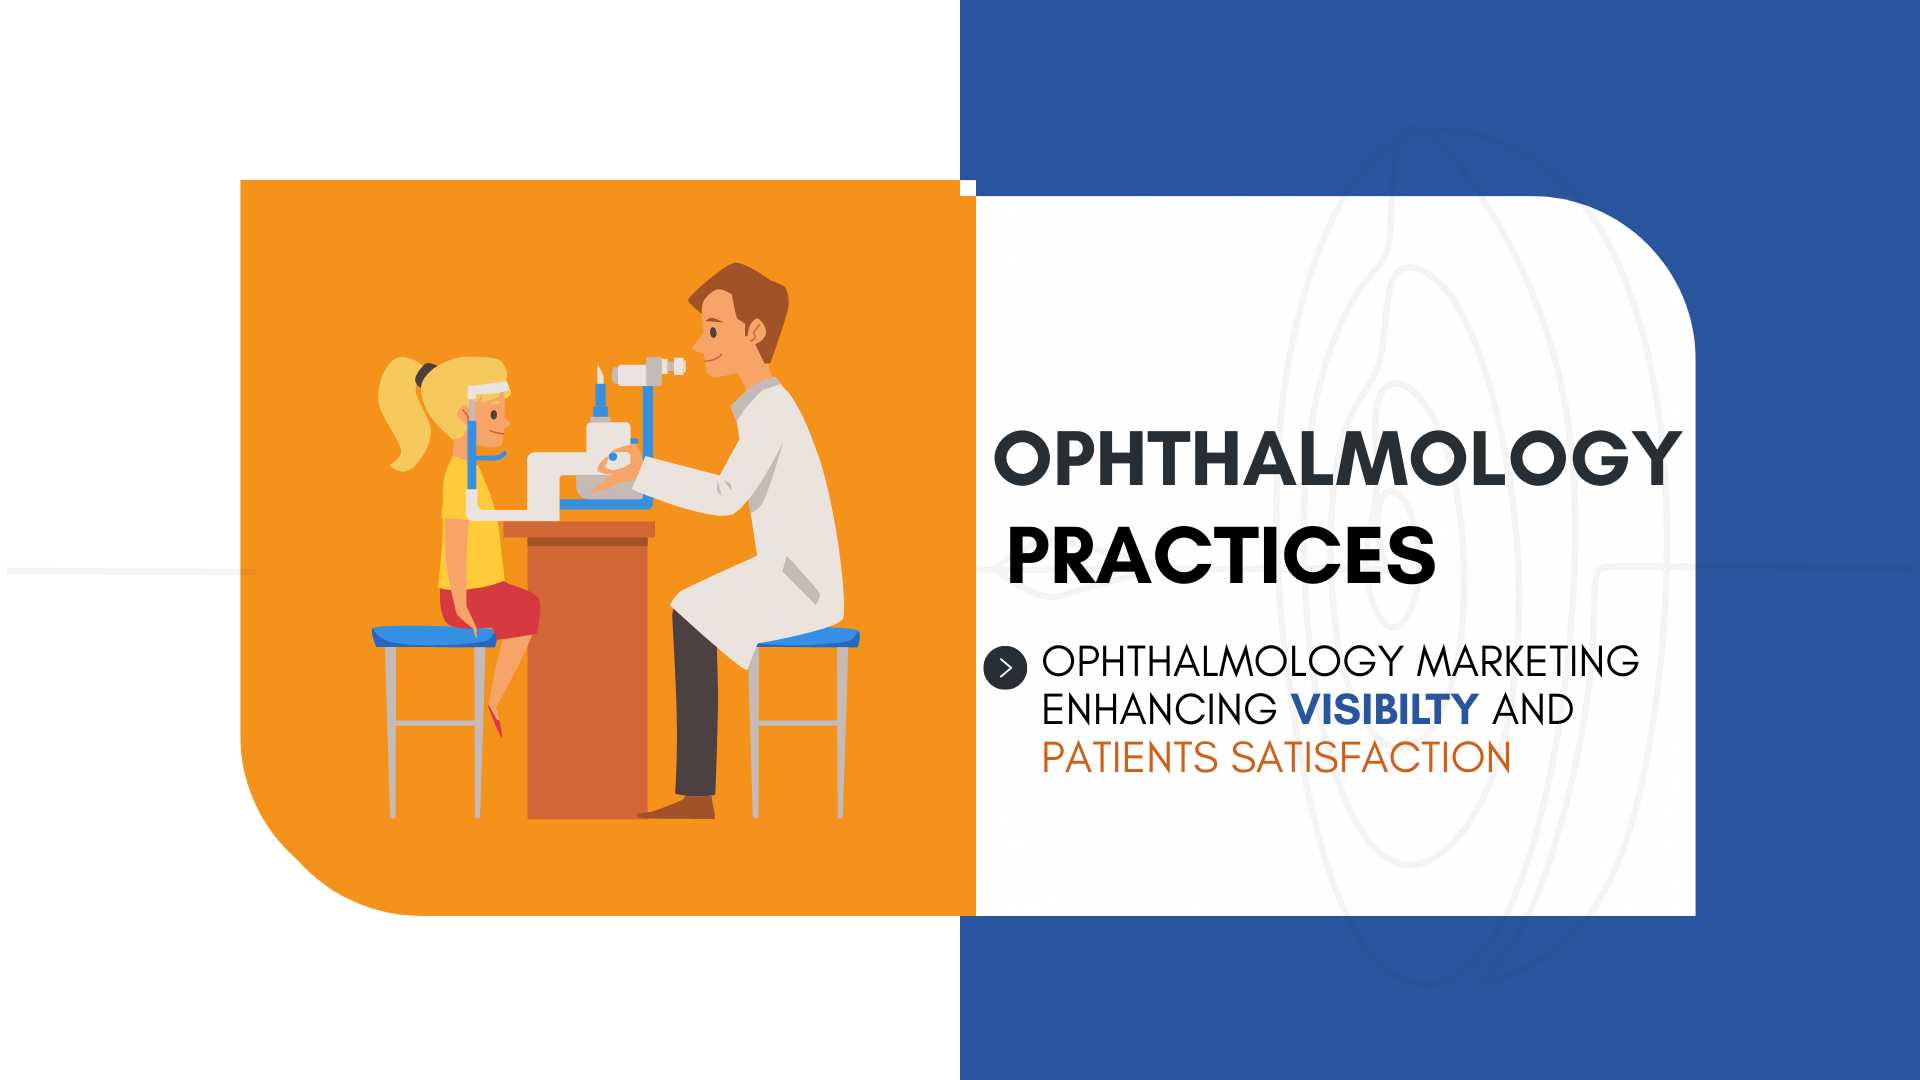 Ophthalmology Marketing: Enhancing Visibility And Patient Satisfaction